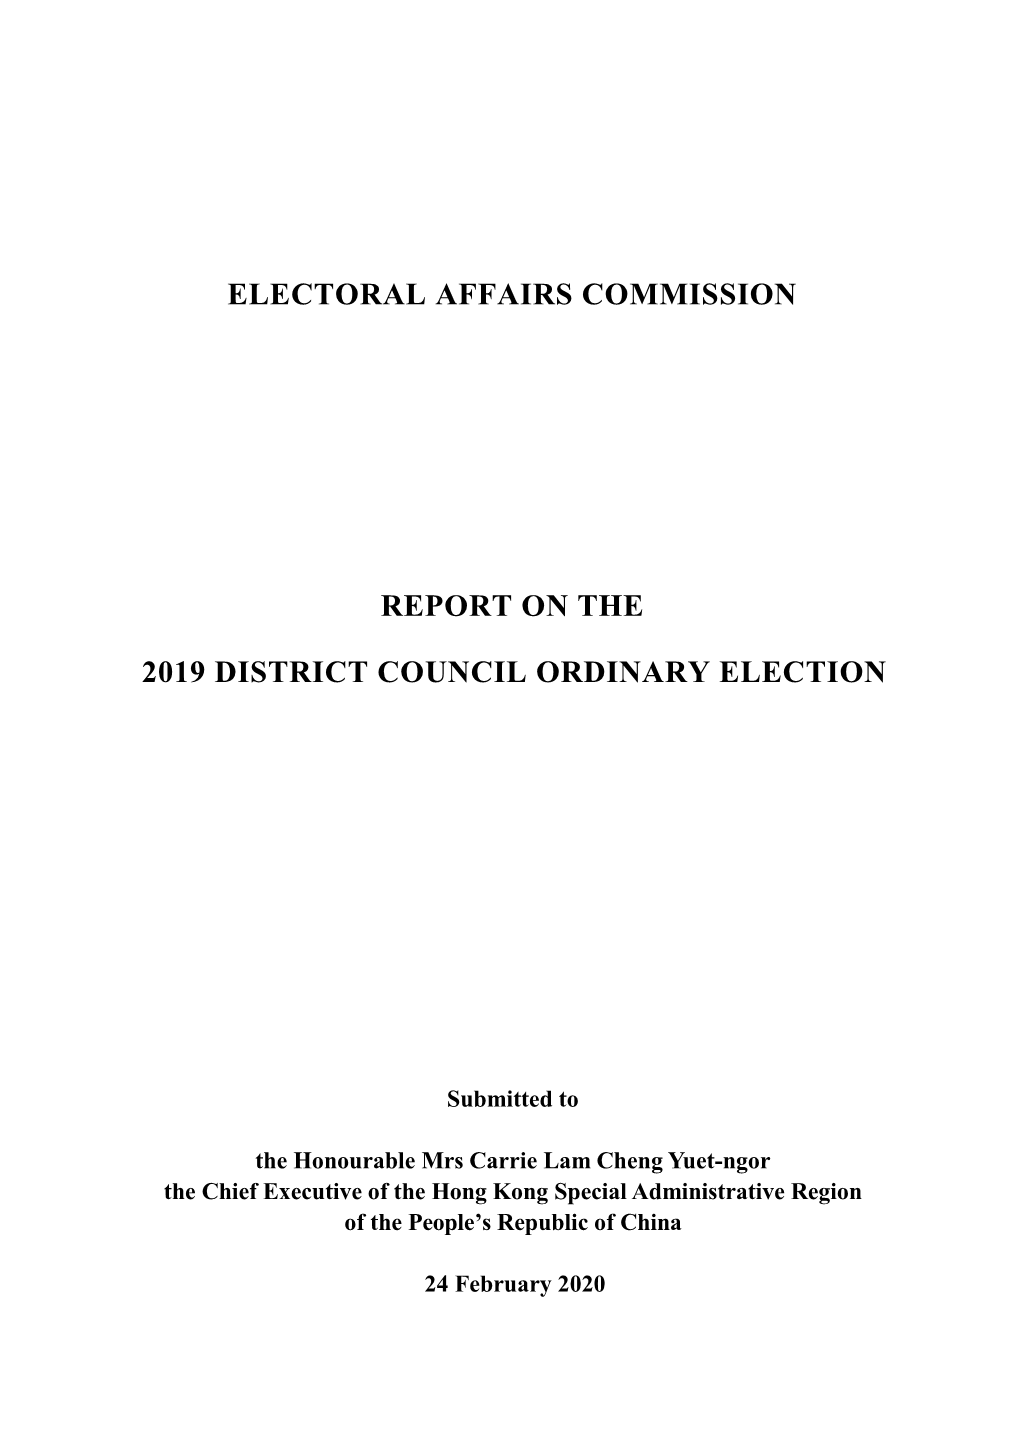 Electoral Affairs Commission Report on the 2019 District Council